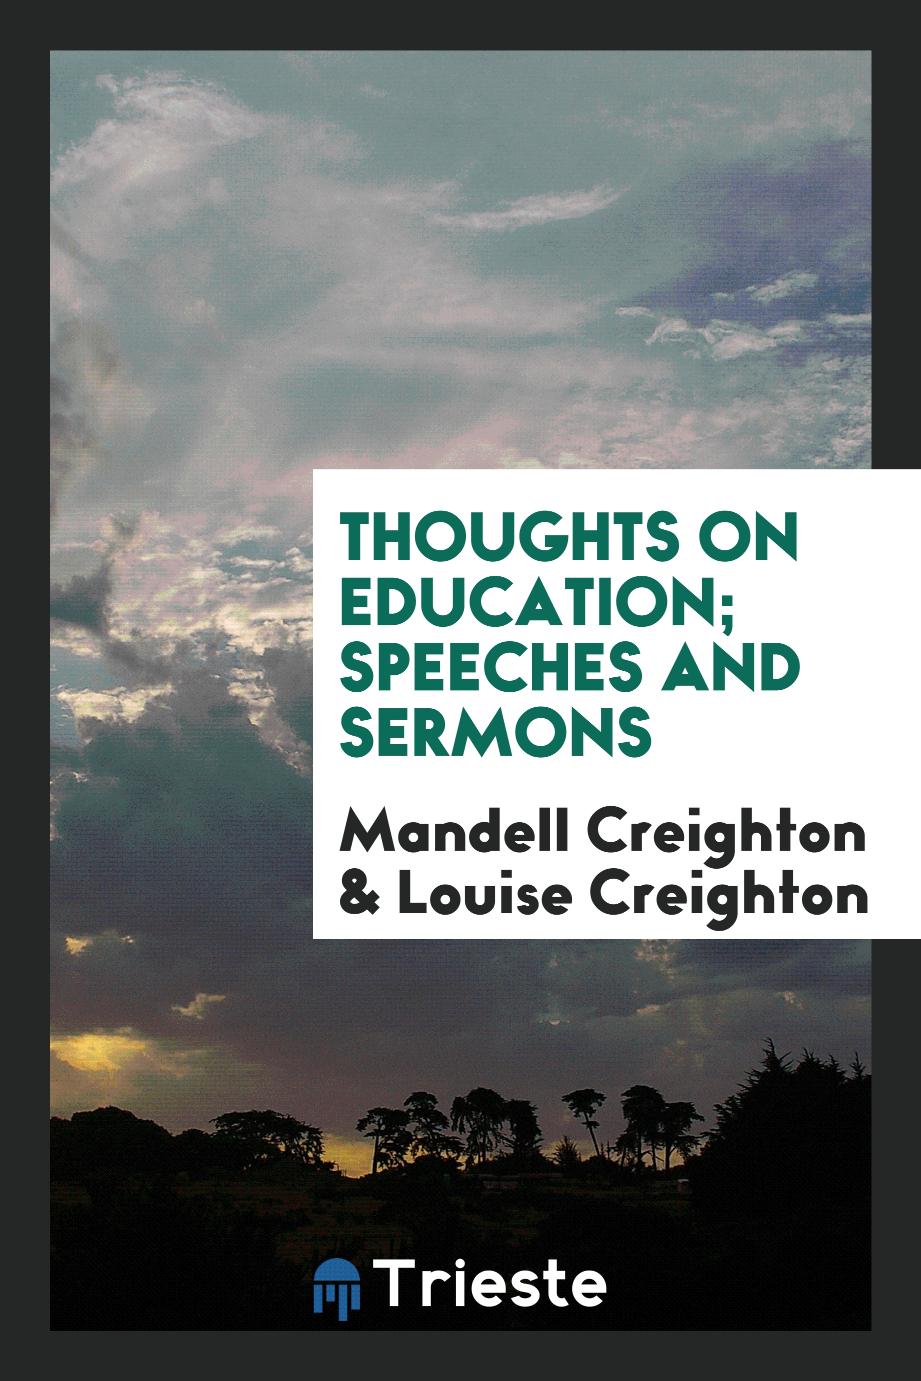 Thoughts on education; speeches and sermons